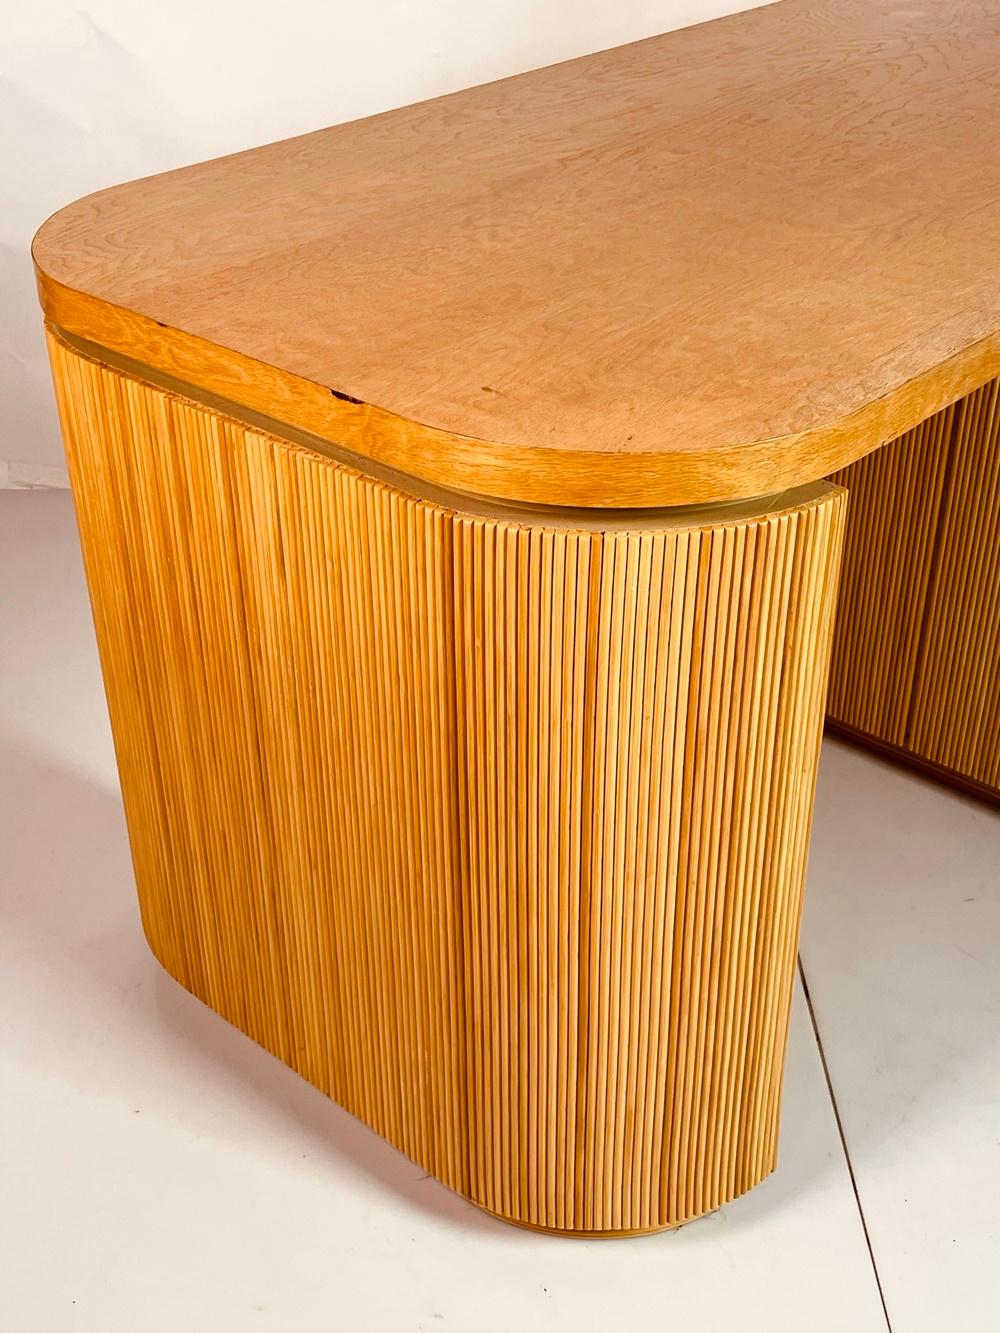 Pencil Reed Executive Desk in the Style of Karl Springer, USA 1970's For Sale 5